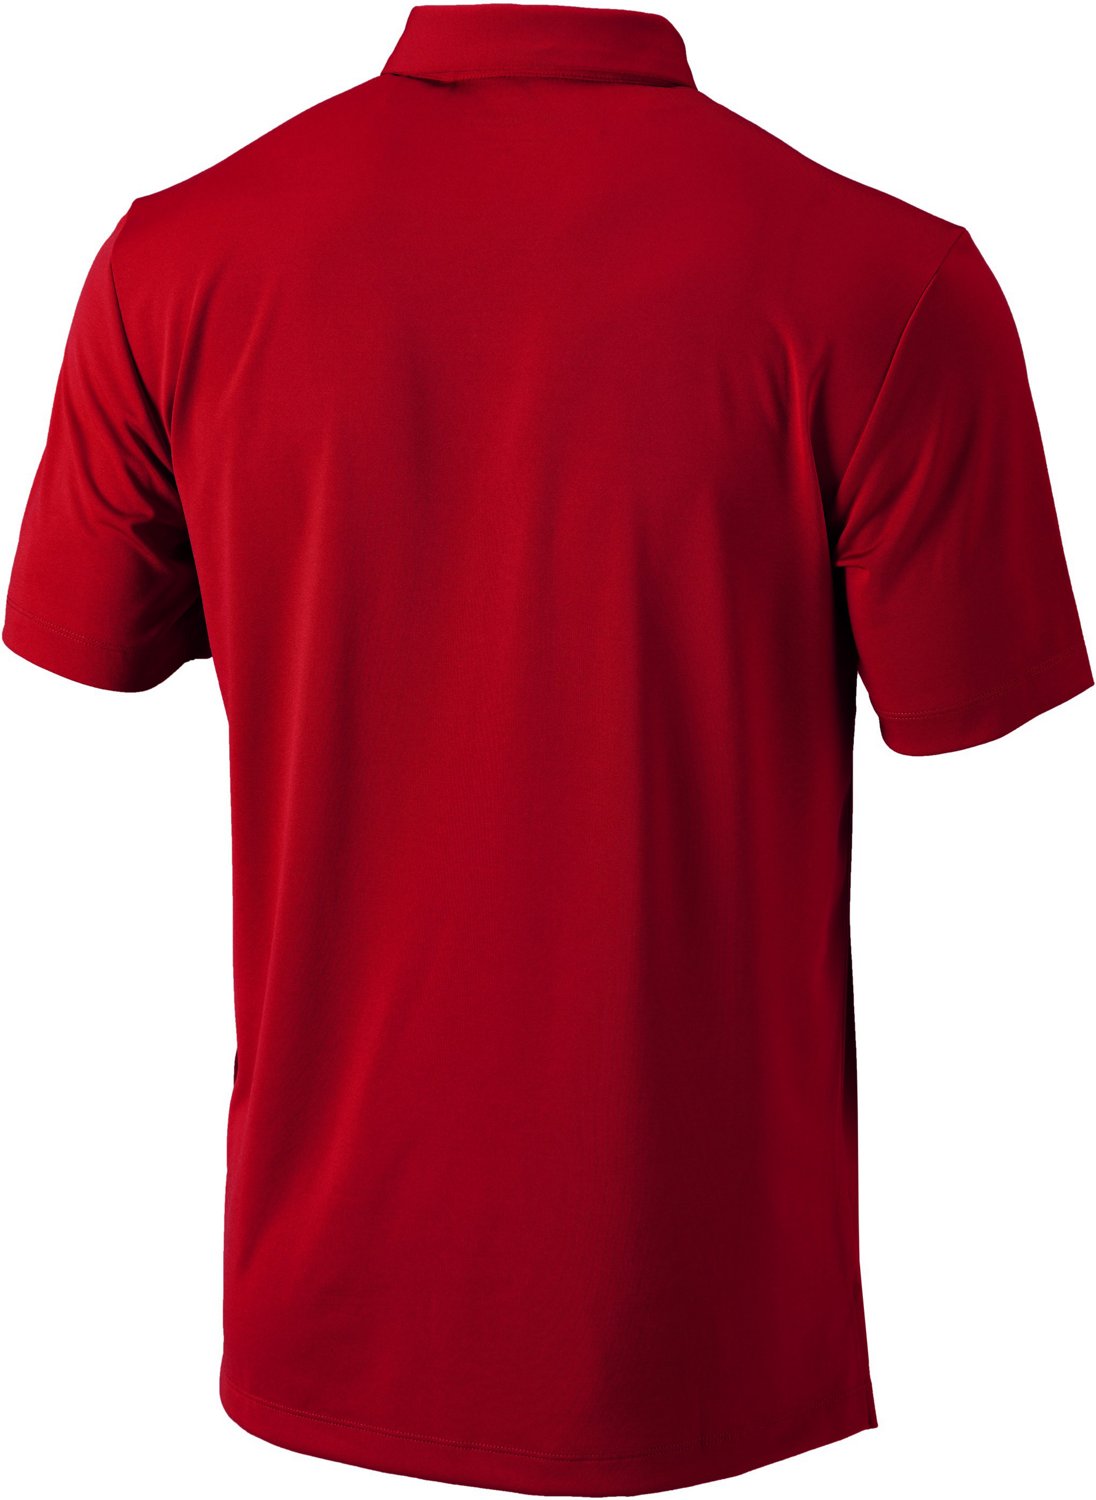  Boston Red Sox Men's Moisture Wicking Active Fabric Polo Shirt  Red : Sports & Outdoors